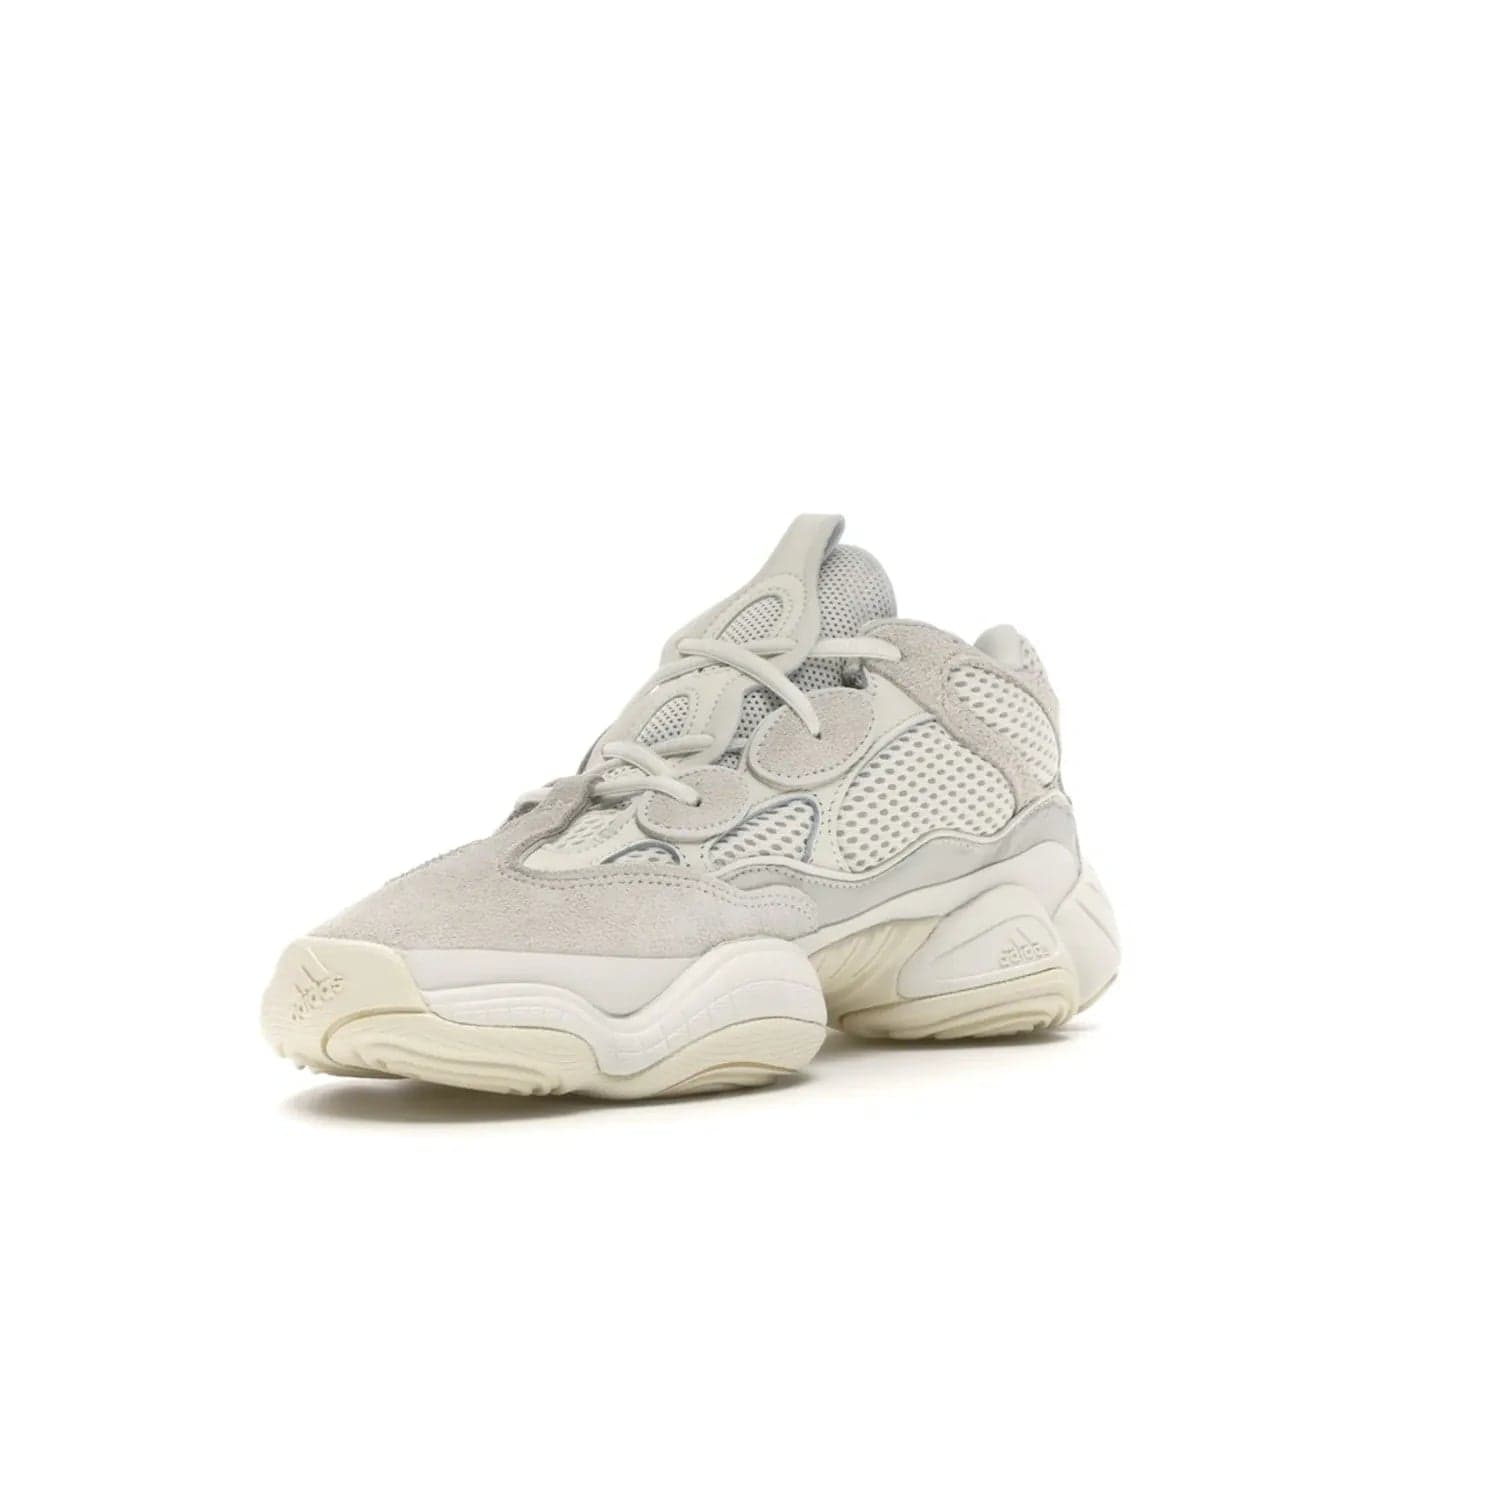 adidas Yeezy 500 Bone White - Image 14 - Only at www.BallersClubKickz.com - Classic look perfect for any sneaker collection. The adidas Yeezy 500 "Bone White" blends a white mesh upper with suede overlays & a chunky midsole inspired by the Adidas KB3. Complimented by a tonal-cream outsole, this timeless style is a must-have.